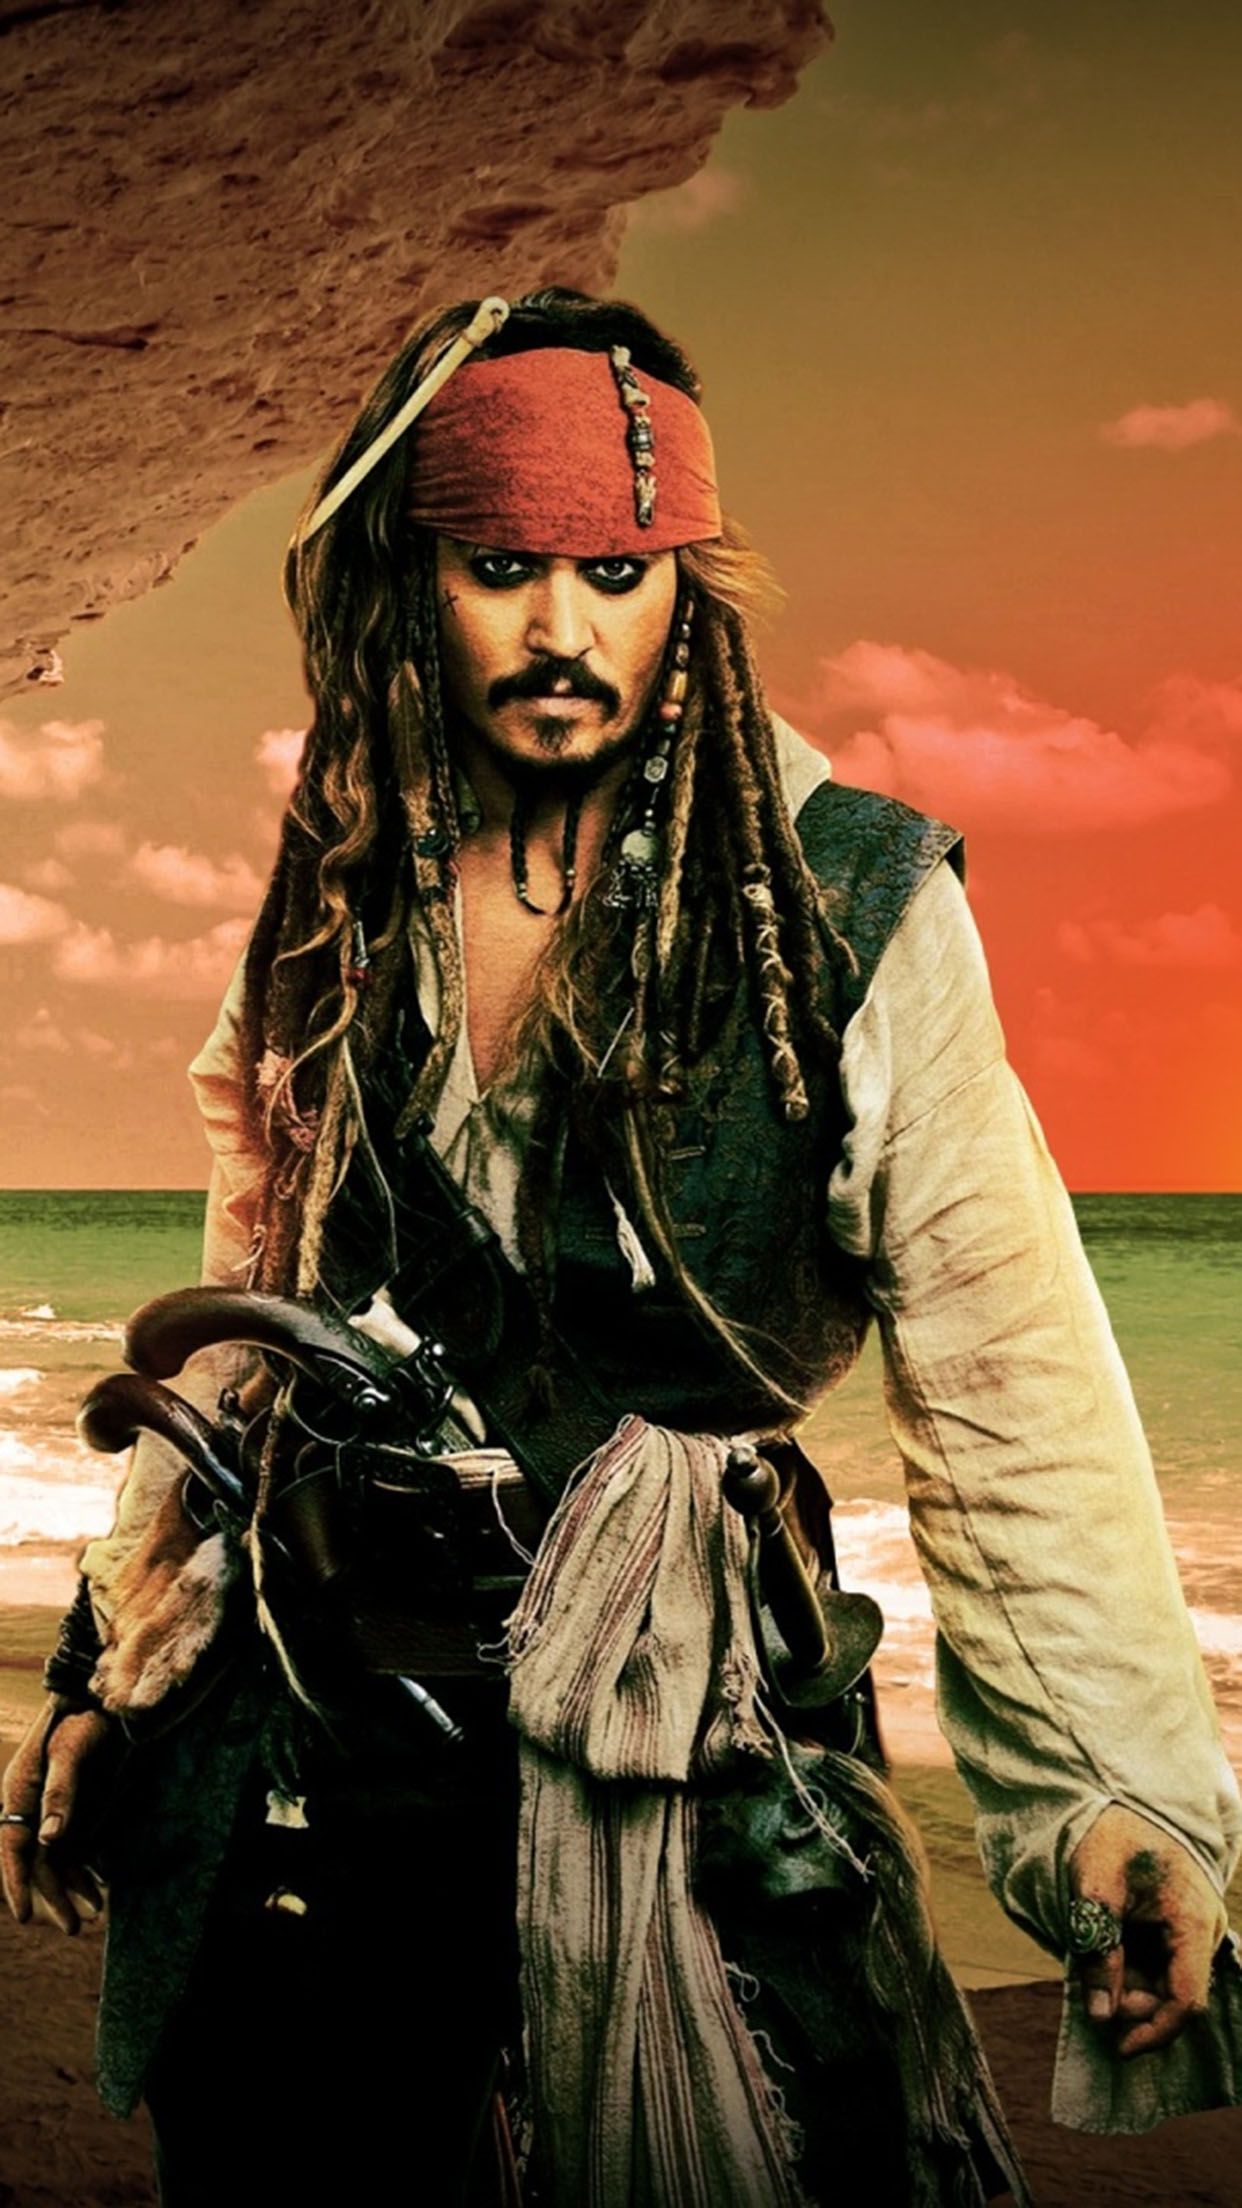 Captain Jack Sparrow 3 Wallpaper for iPhone Pro Max, X, 7